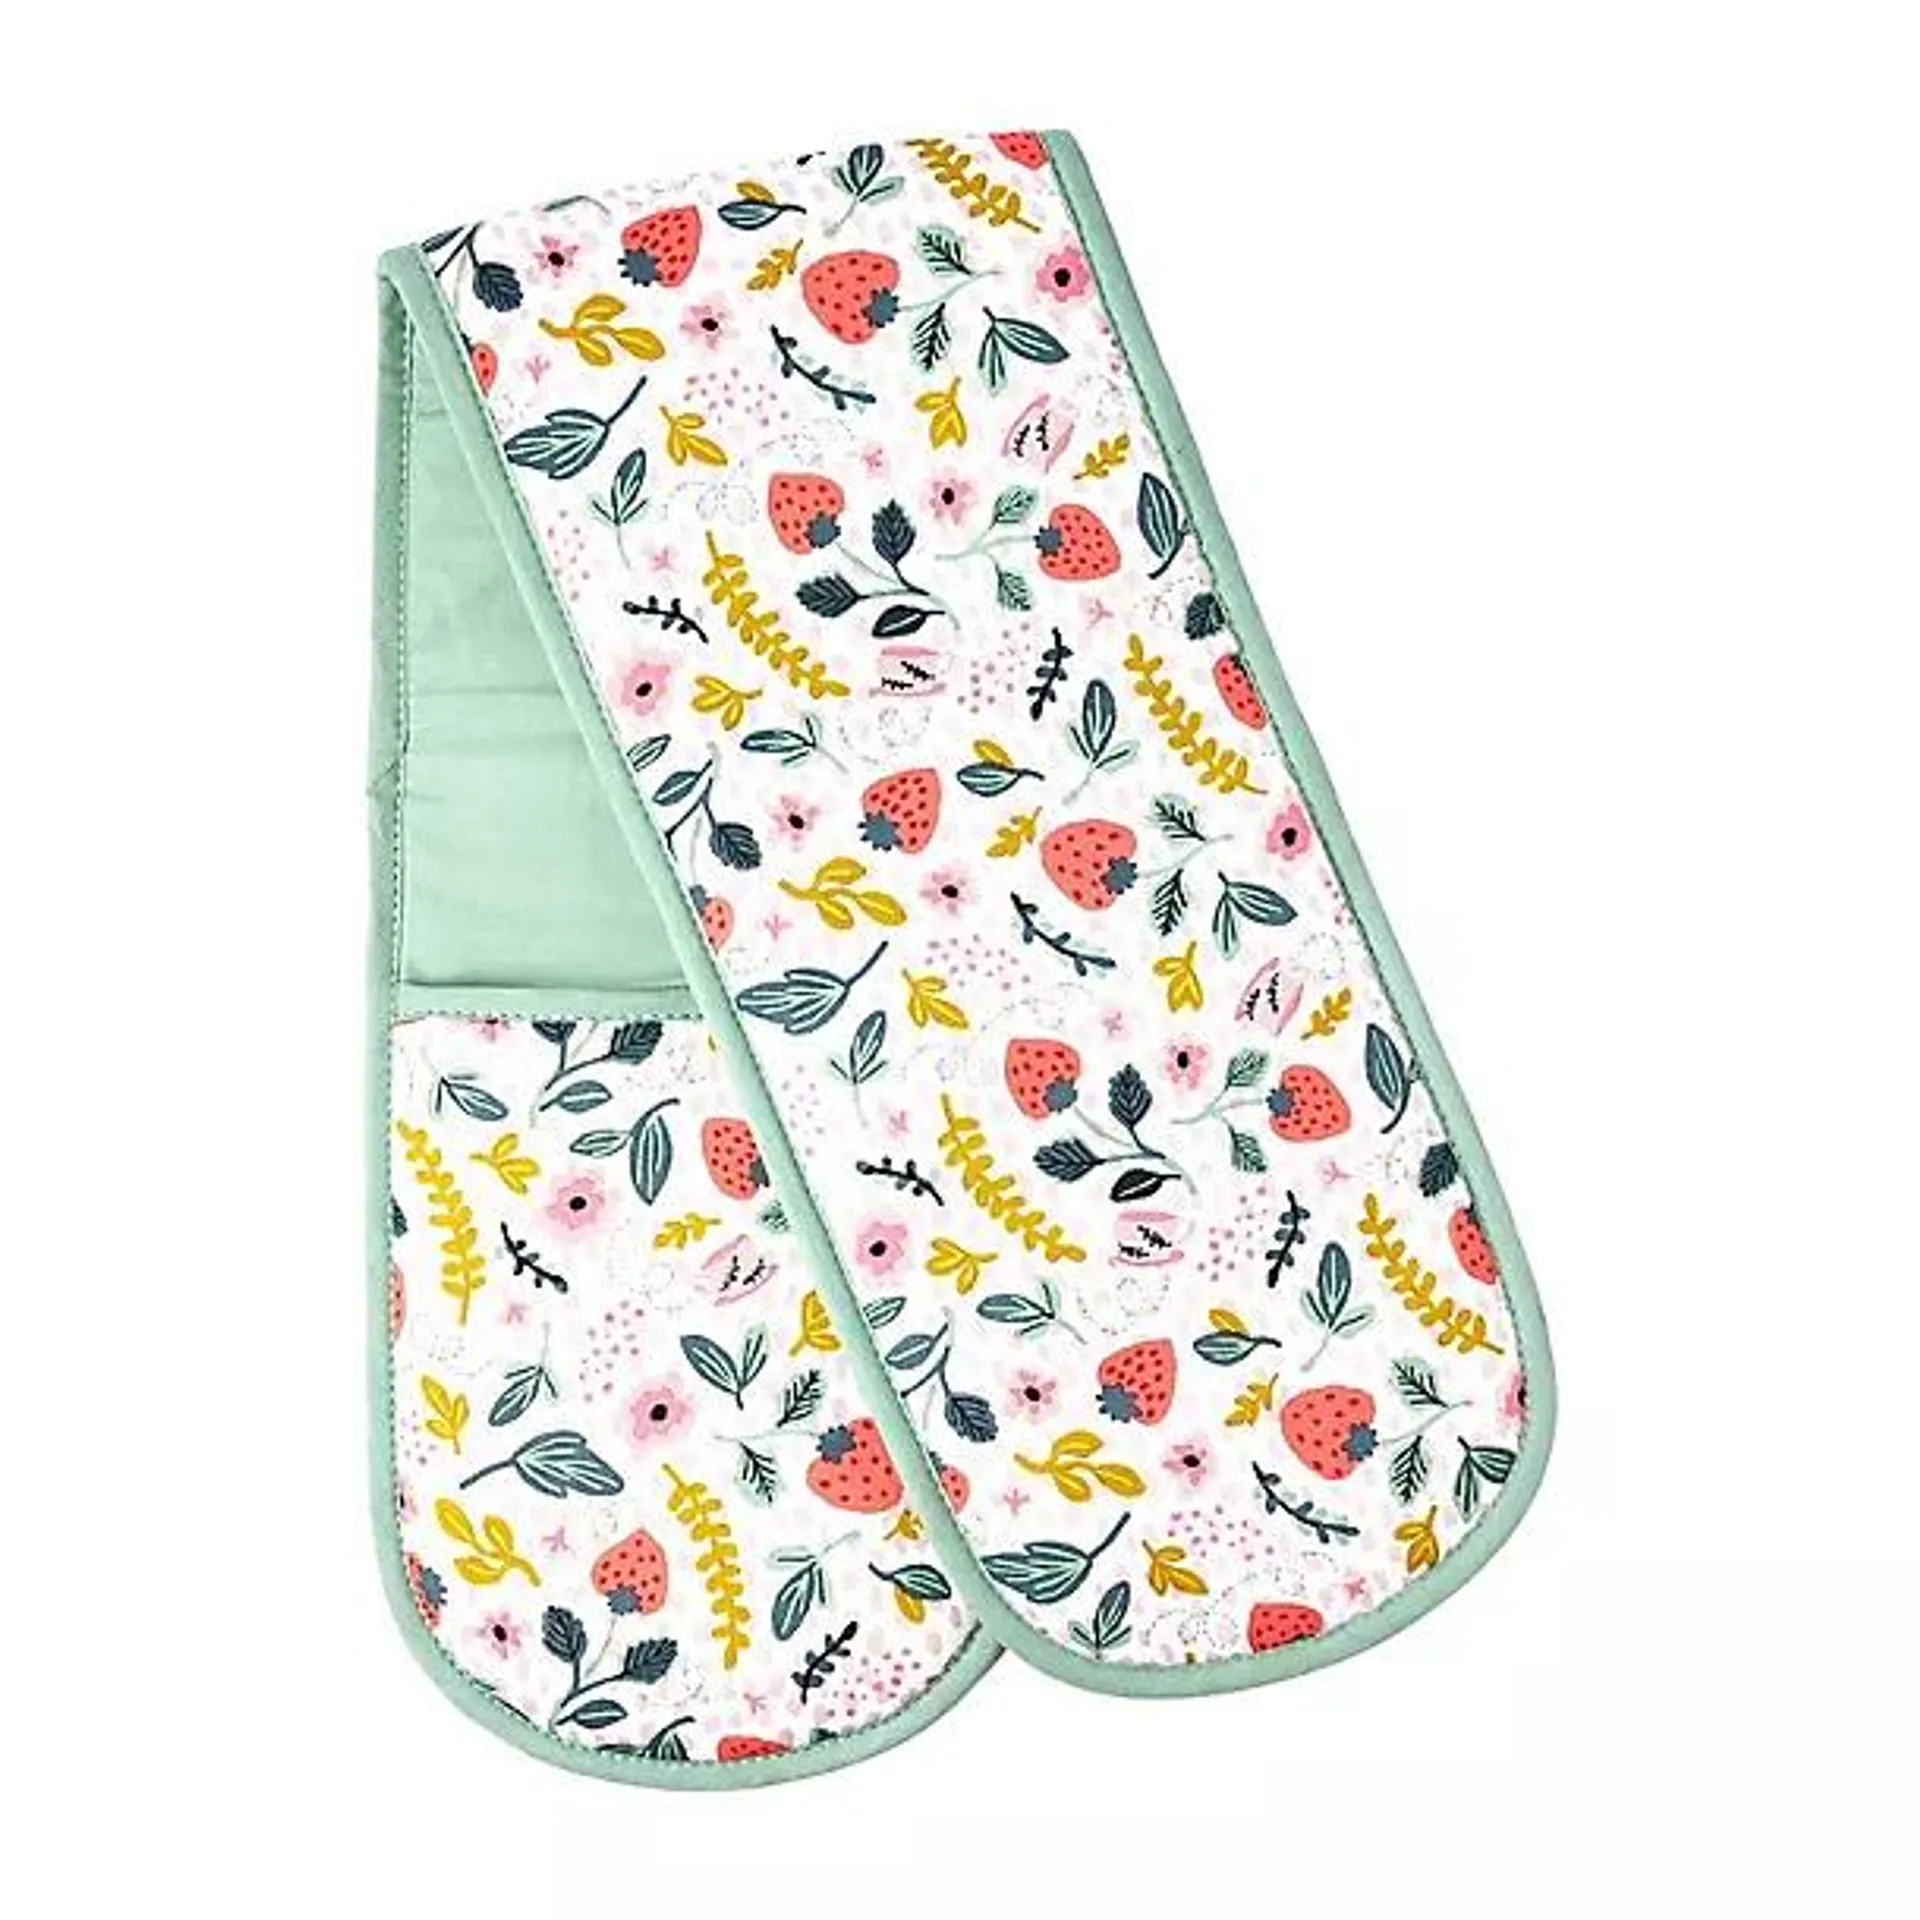 Lakeland Strawberry Patch Double Oven Glove